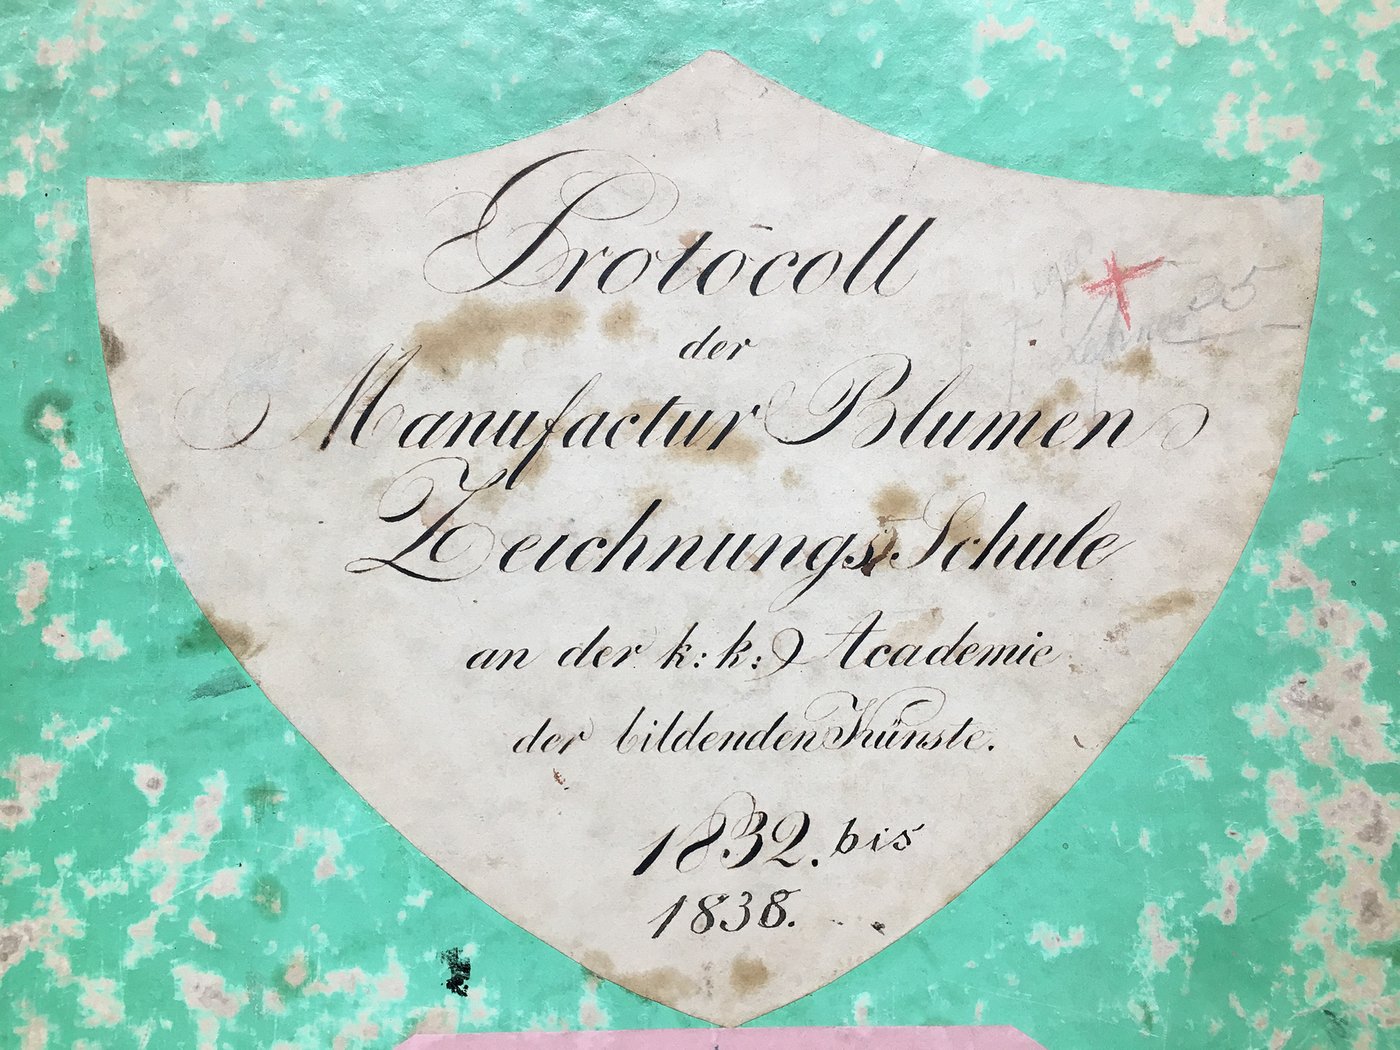 Detail of the cover of a matriculation book made of green paper, the paint has rubbed off in some places, pasted with a white label with the title and date of the book in ornate handwriting.